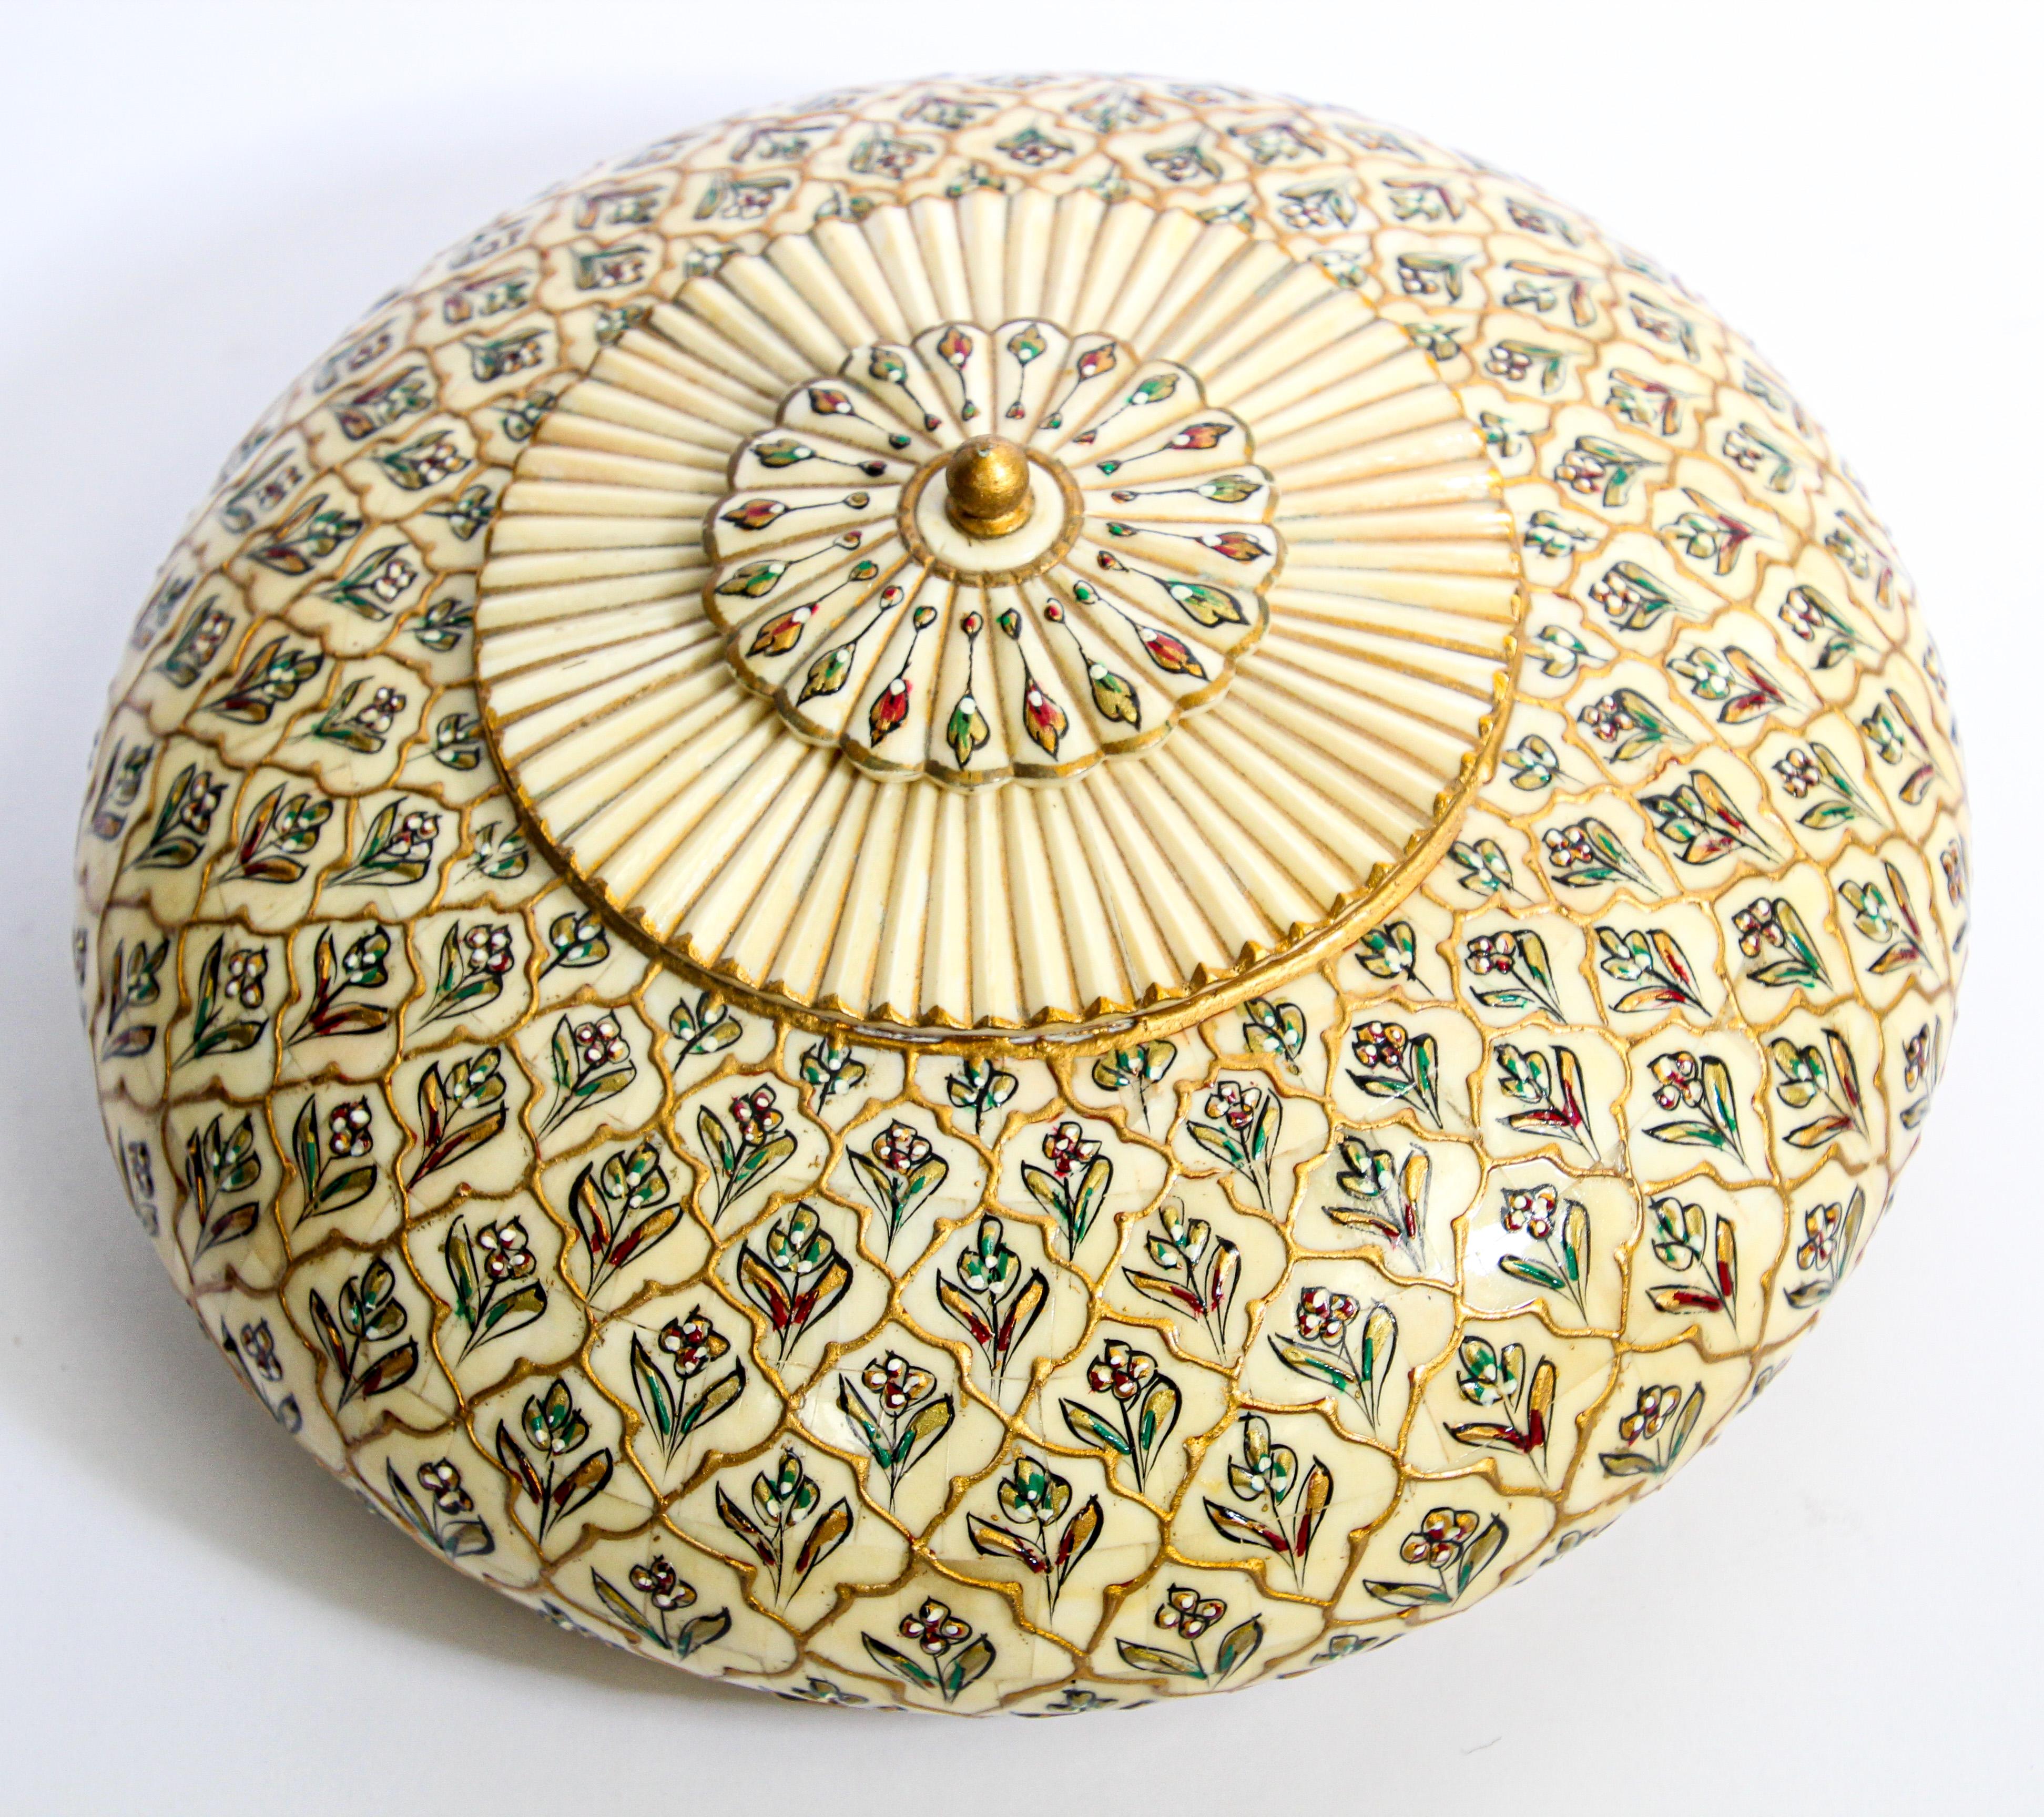 Hand-Crafted Collectible Opium Container Mughal Art Round Lidded Box For Sale